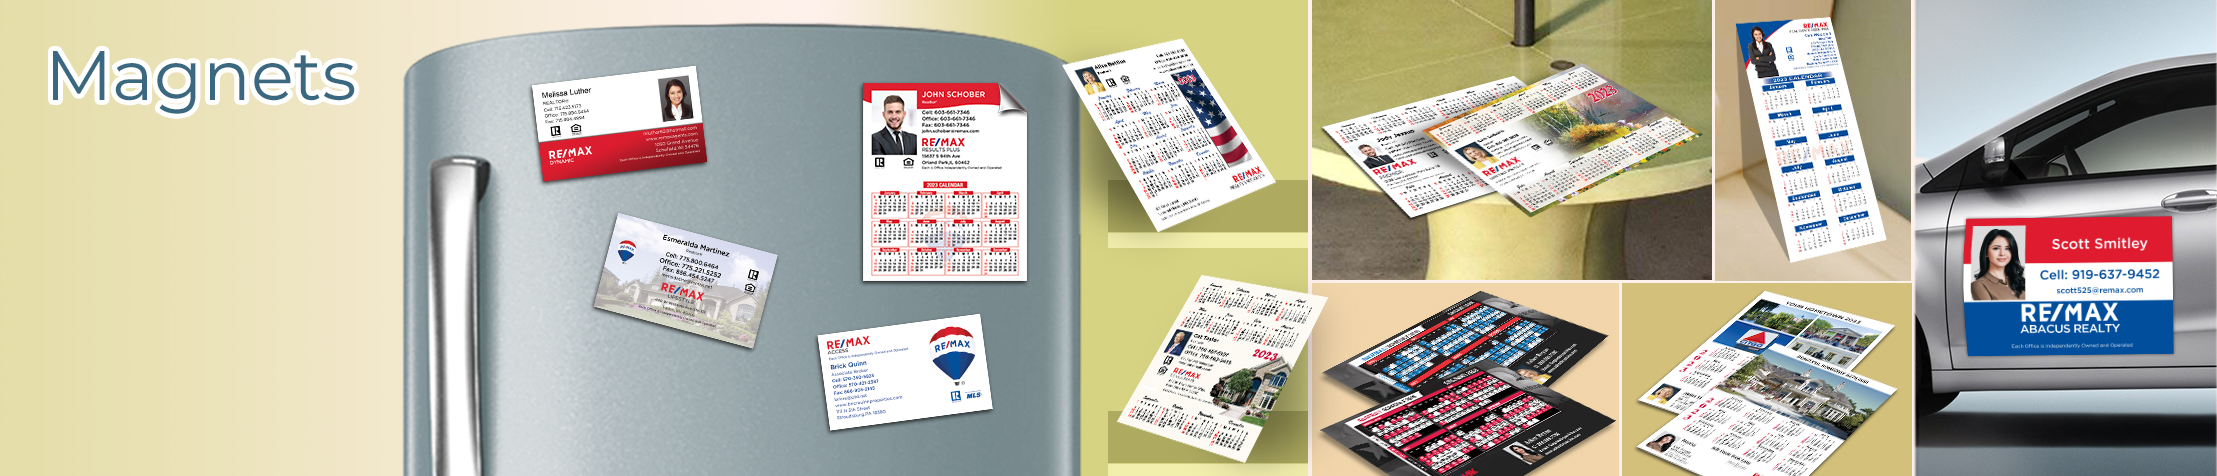 RE/MAX Real Estate Magnets - RE/MAX car magnets, sports schedules, calendar magnets | BestPrintBuy.com